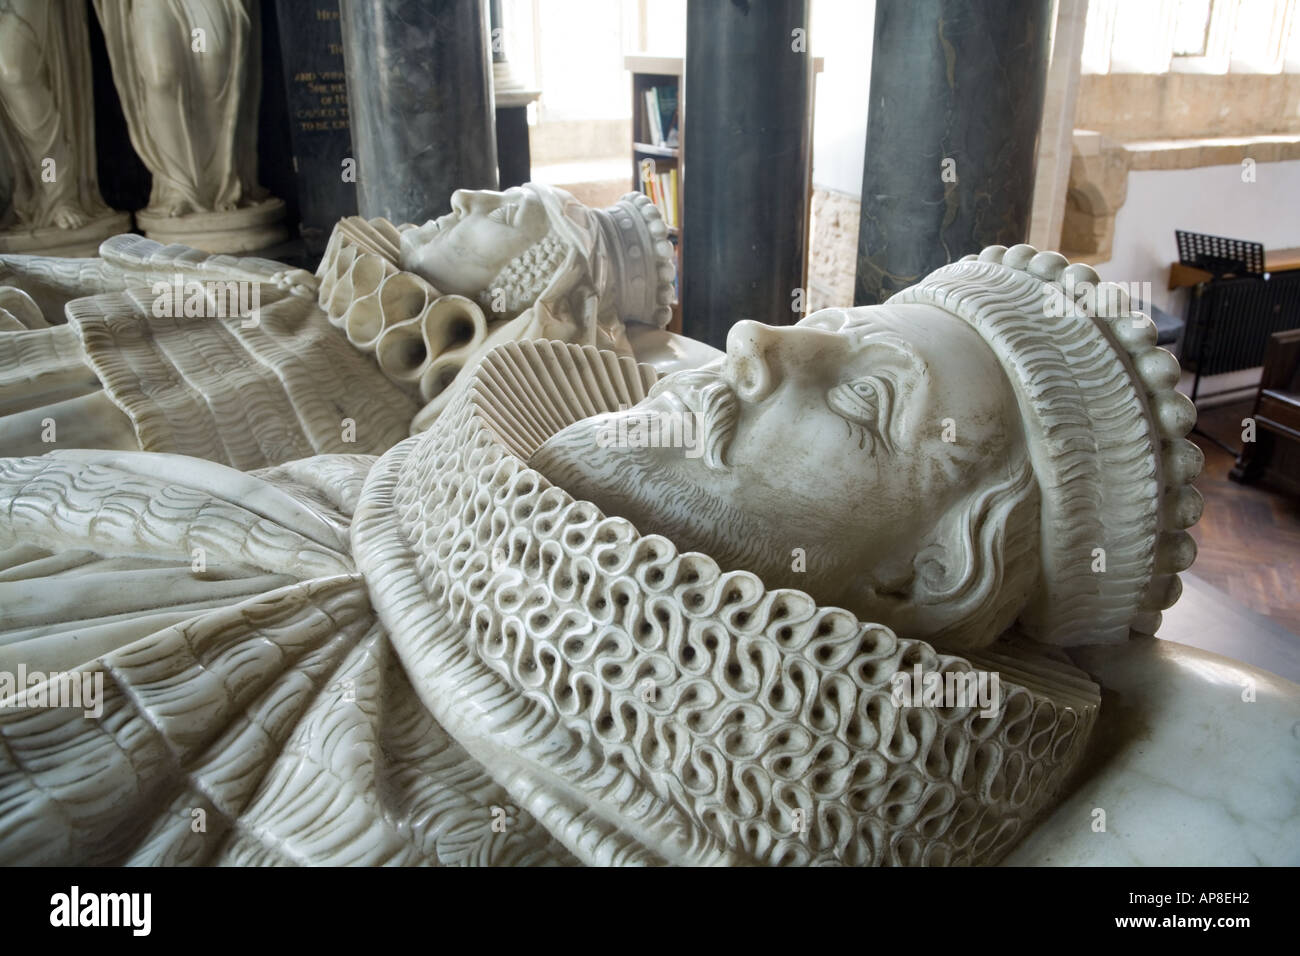 The ornate marble tomb of Sir Baptist Hicks in St James church in the Cotswold town of Chipping Campden, Gloucestershire Stock Photo